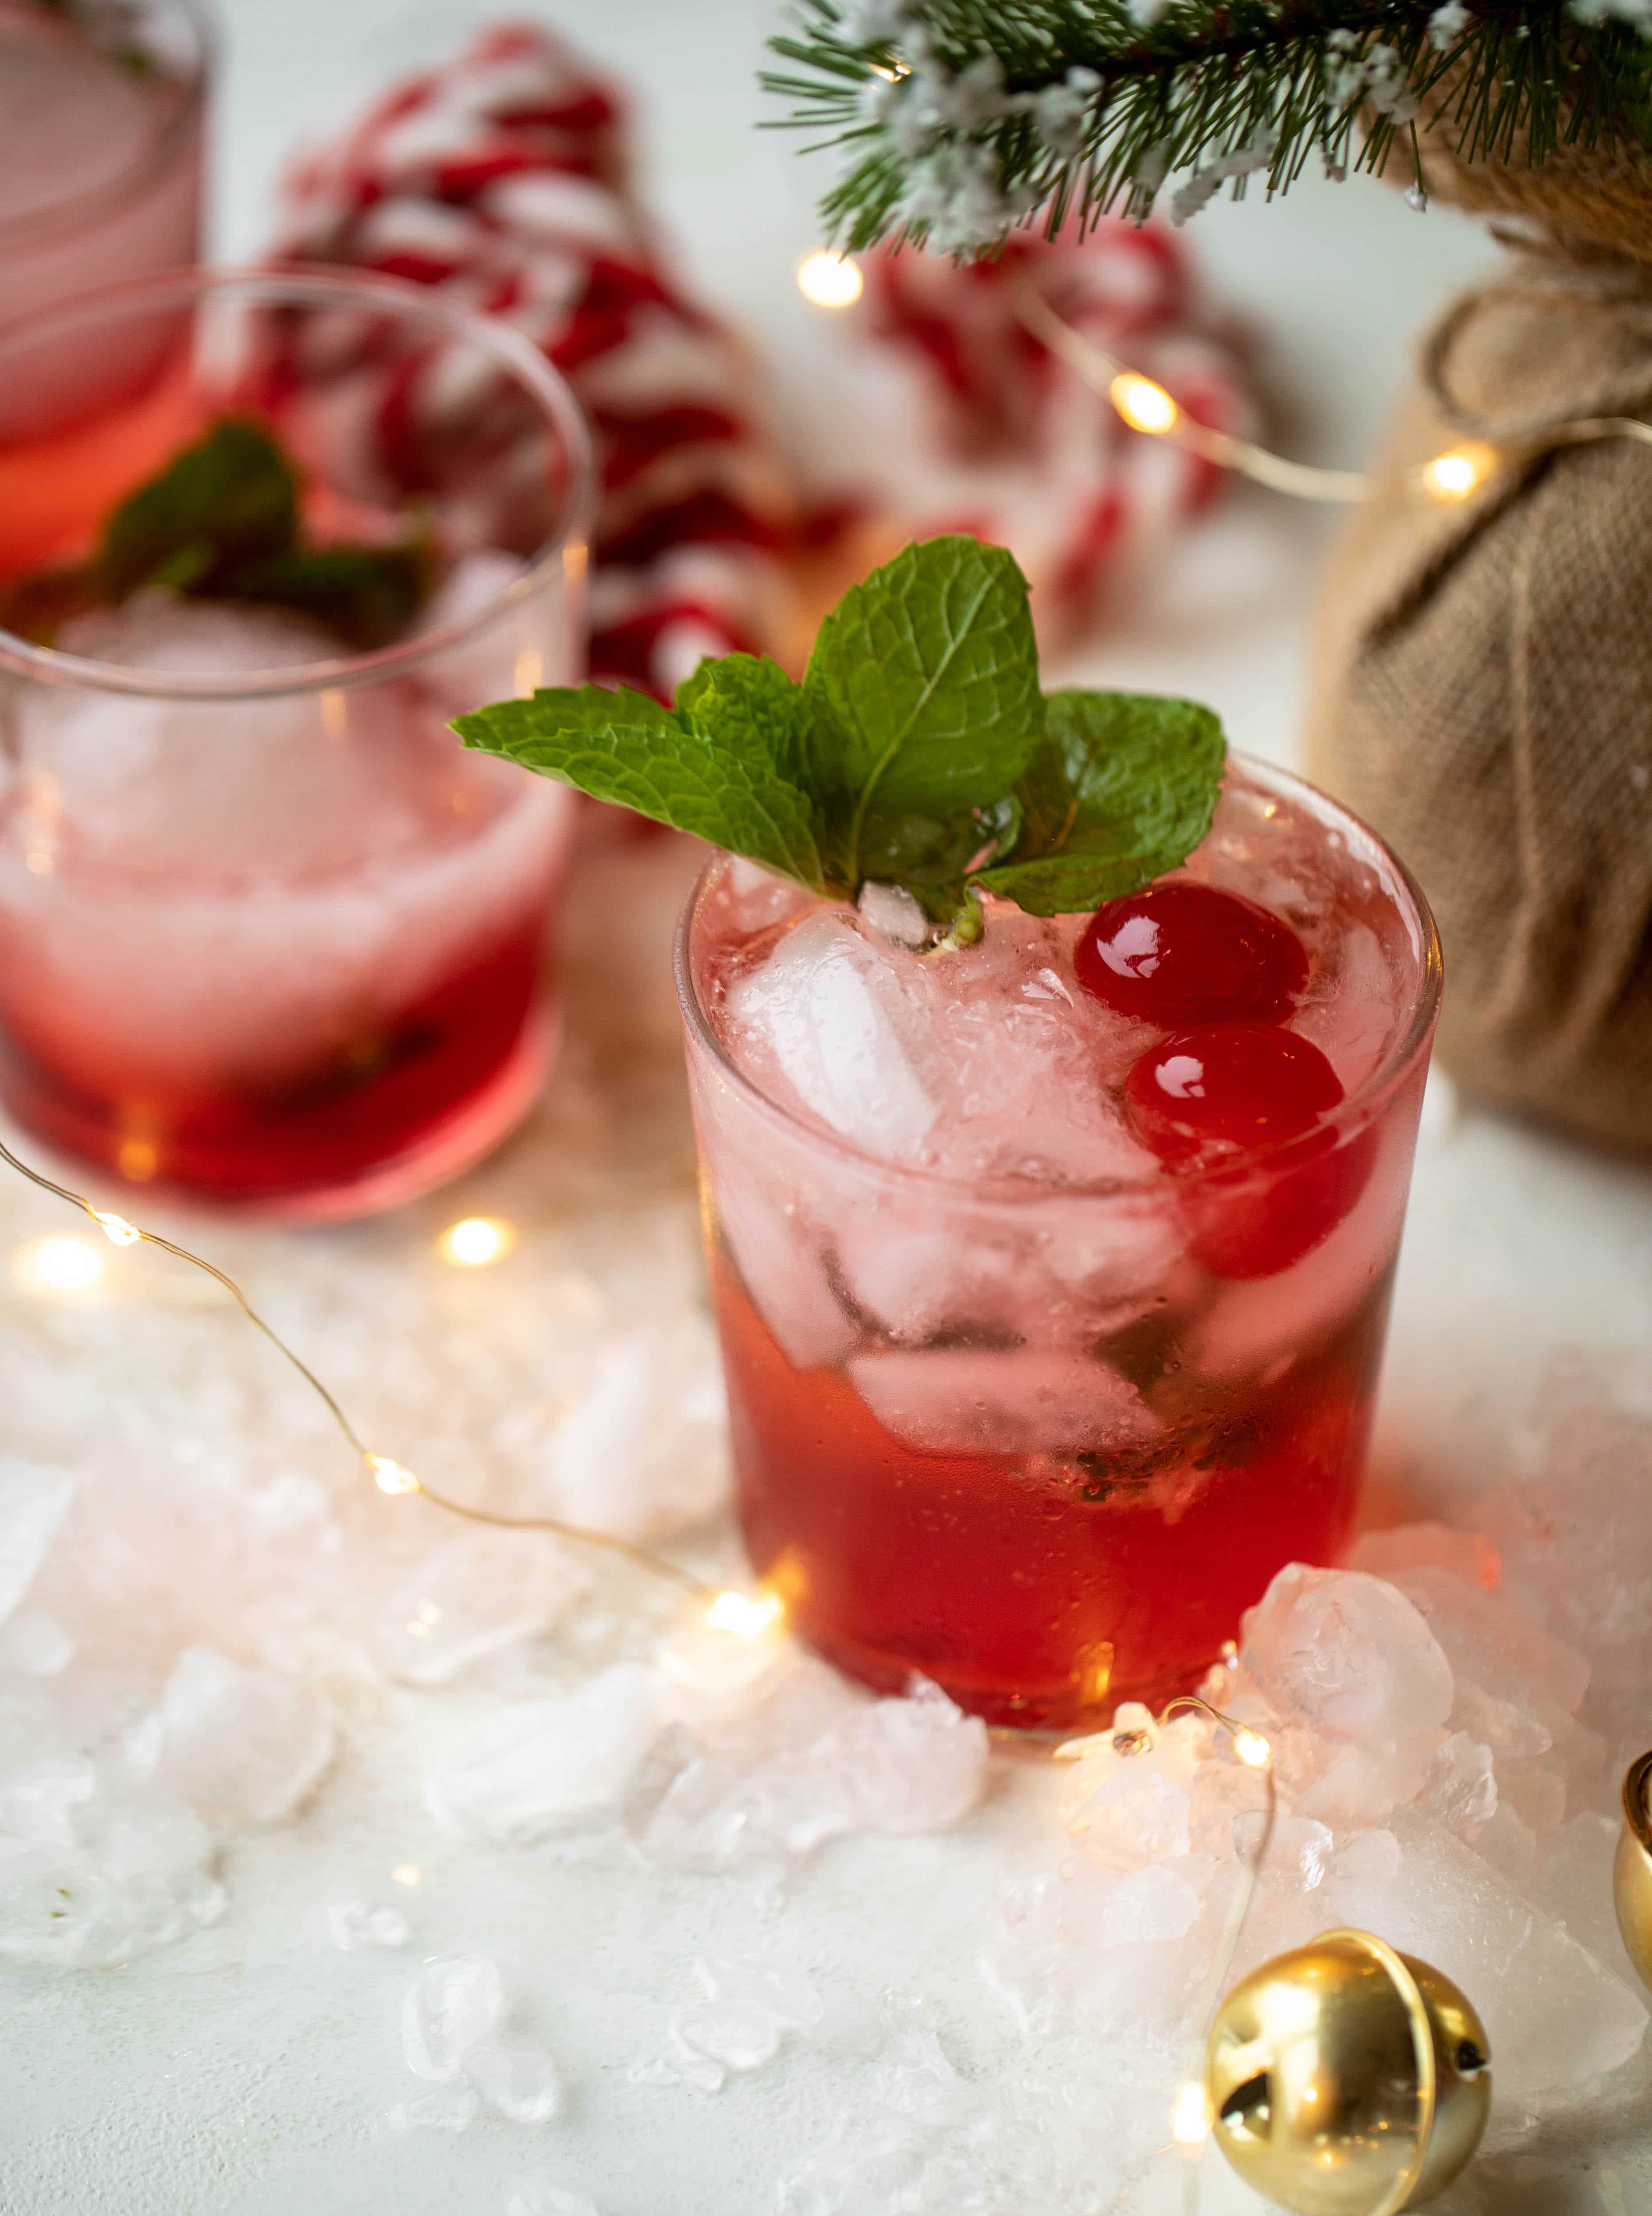 The merry cherry christmas cocktail is here! Vodka and cherries and mint, oh my! This is such a fun drink that can be made into a punch. It's delicious!